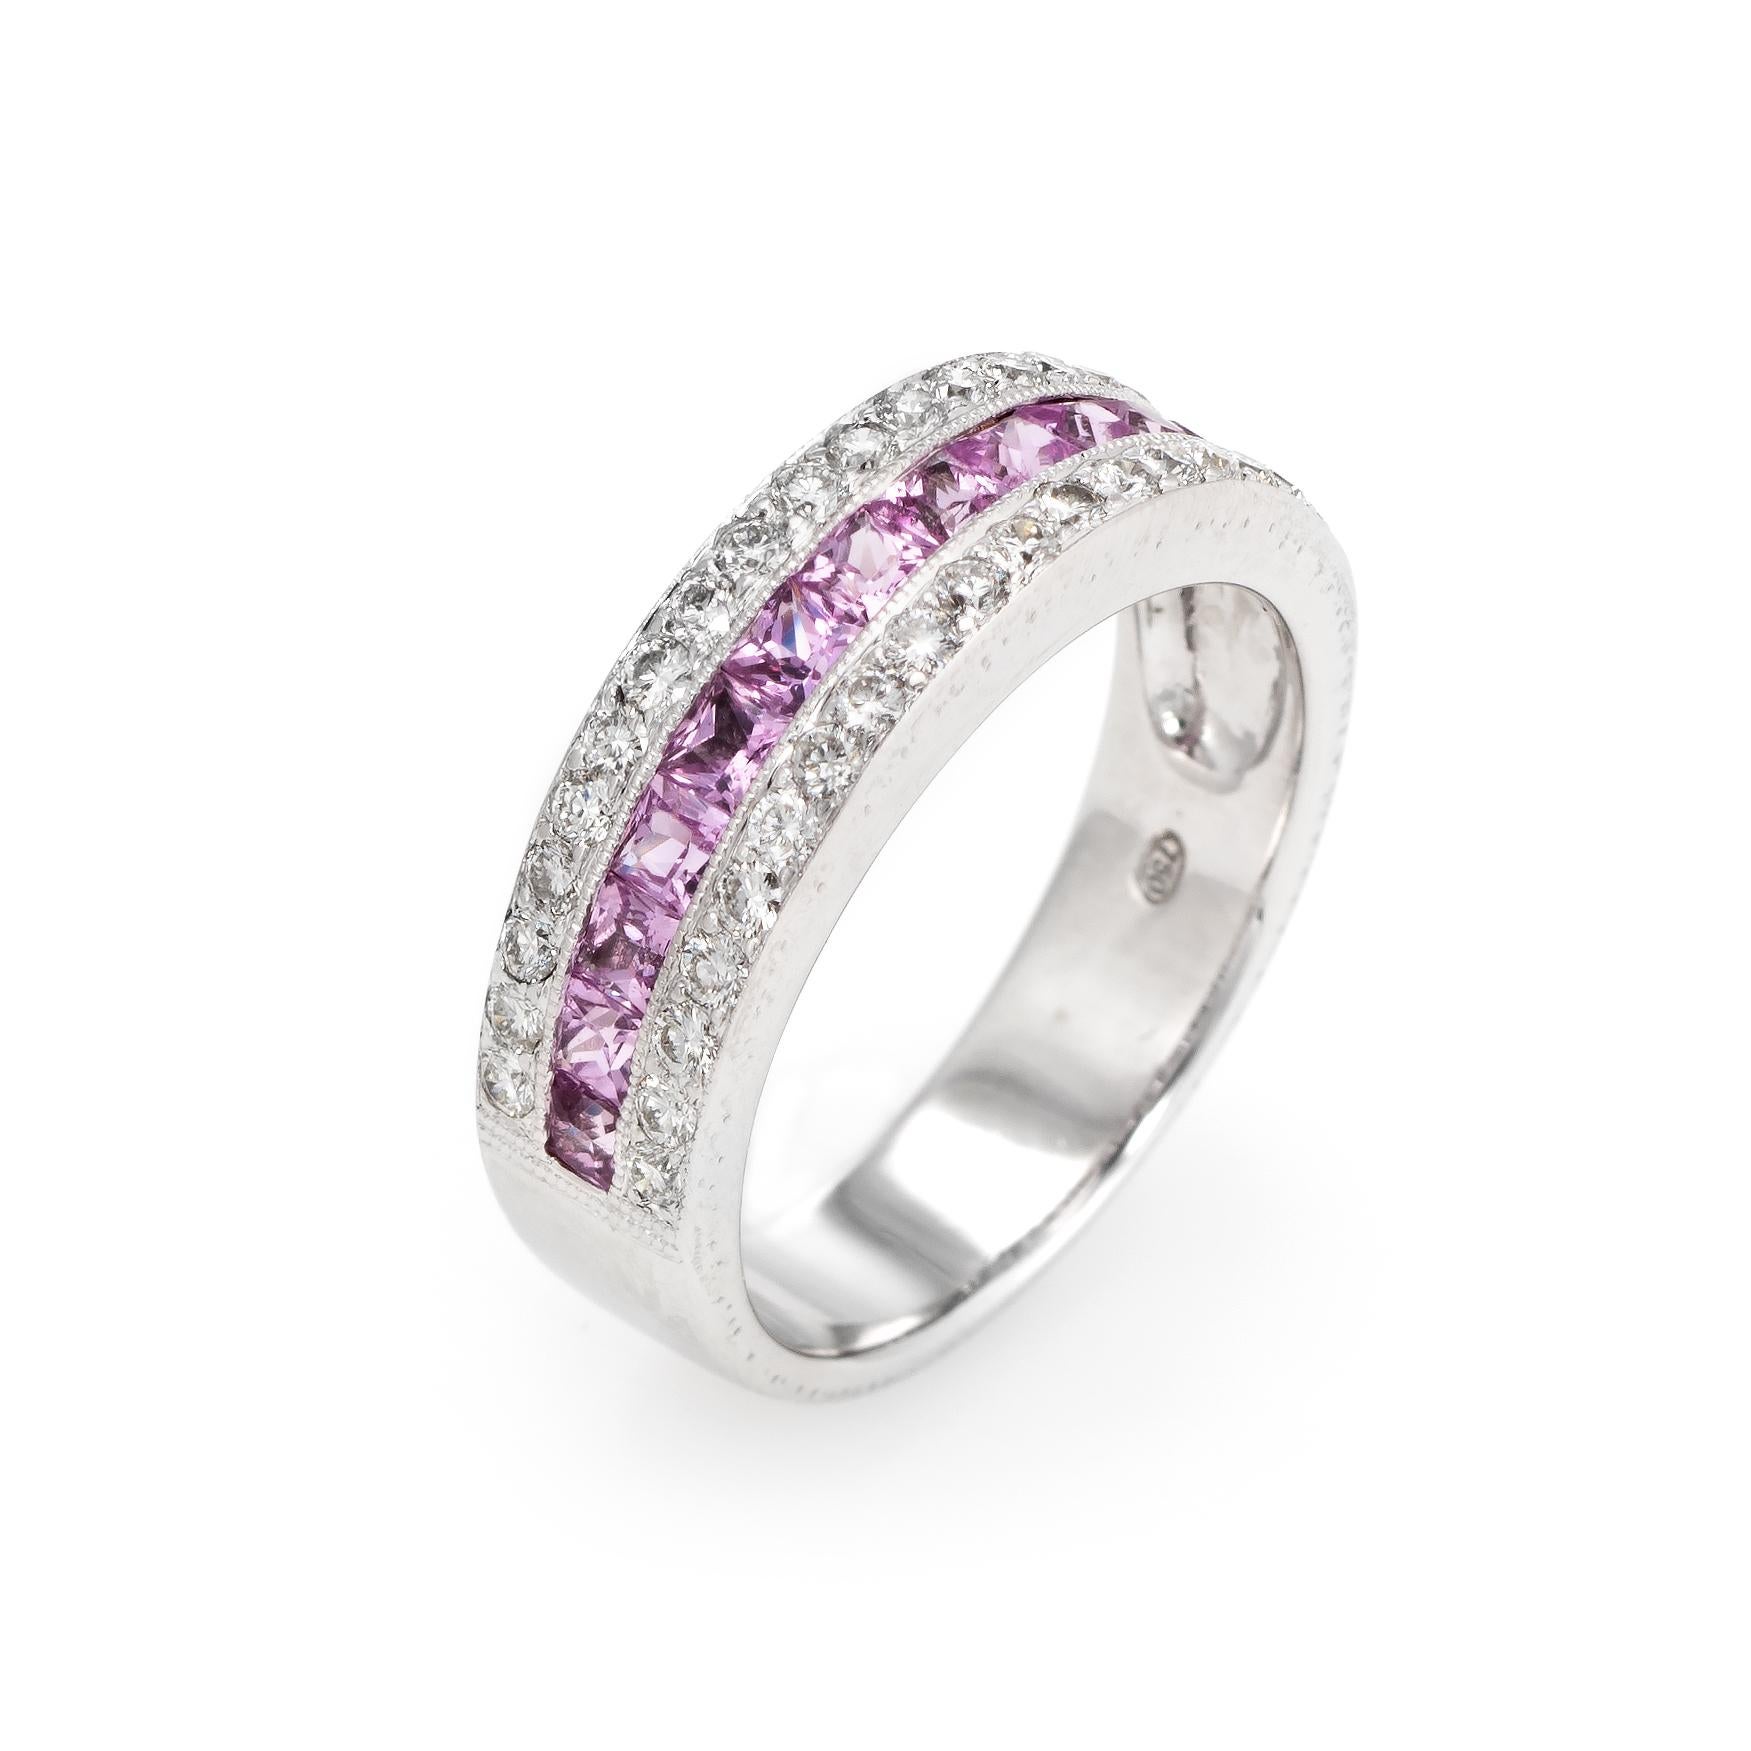 Elegant & finely detailed estate pink sapphire & diamond band, crafted in 18 karat white gold. 

13 centrally mounted princess cut pink sapphires are estimated at 0.05 carats each and total an estimated 0.65 carats. 36 round brilliant cut diamonds